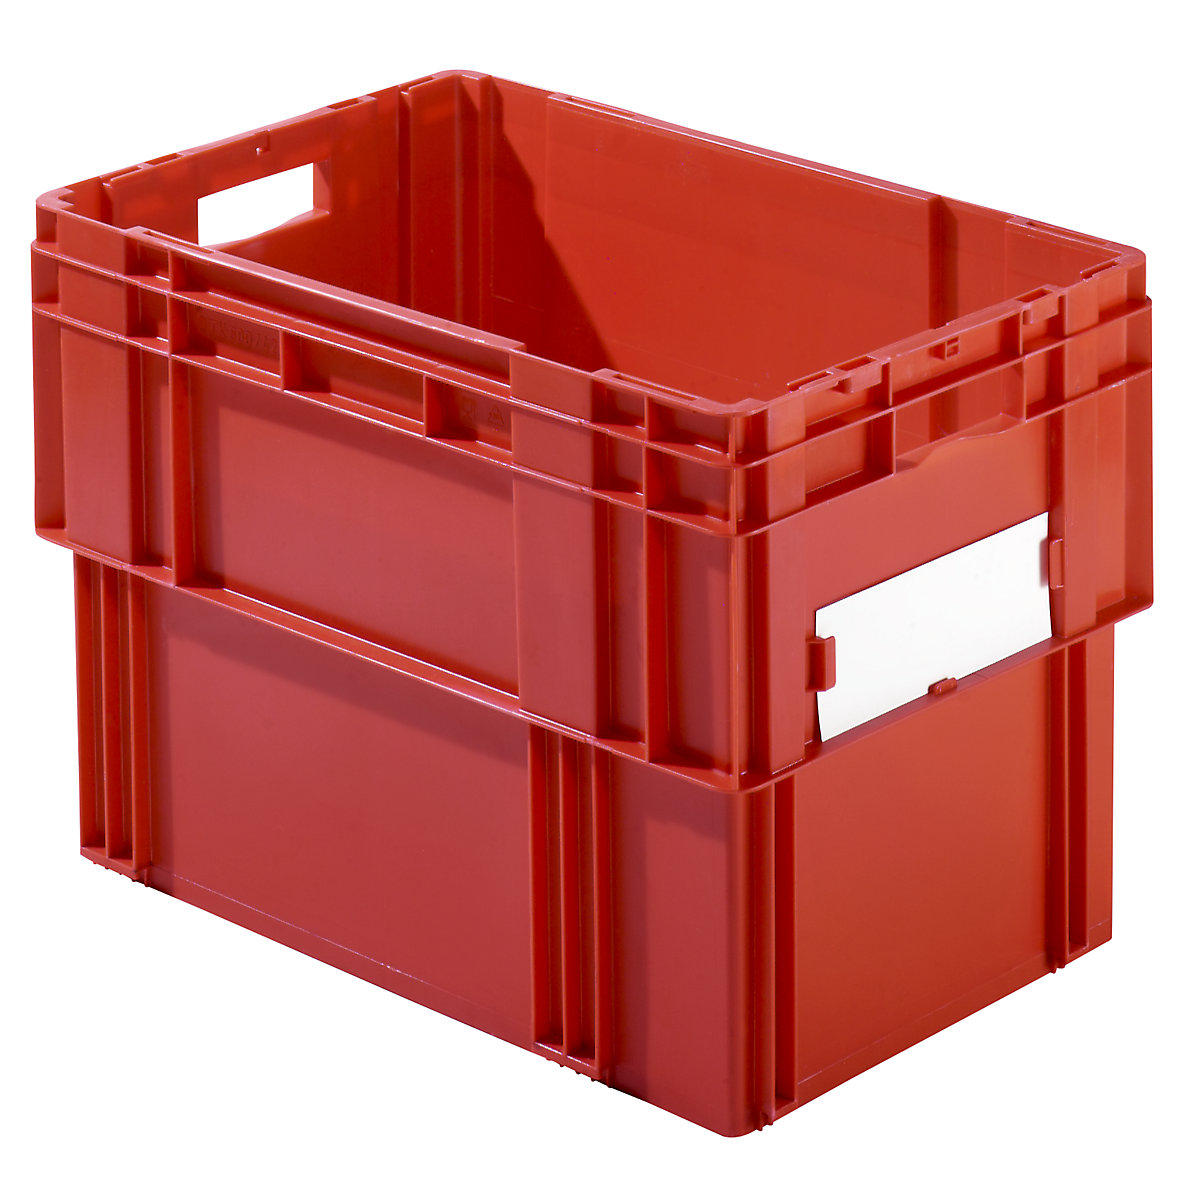 Stacking box, capacity 78 litres, solid walls and base, pack of 4, red